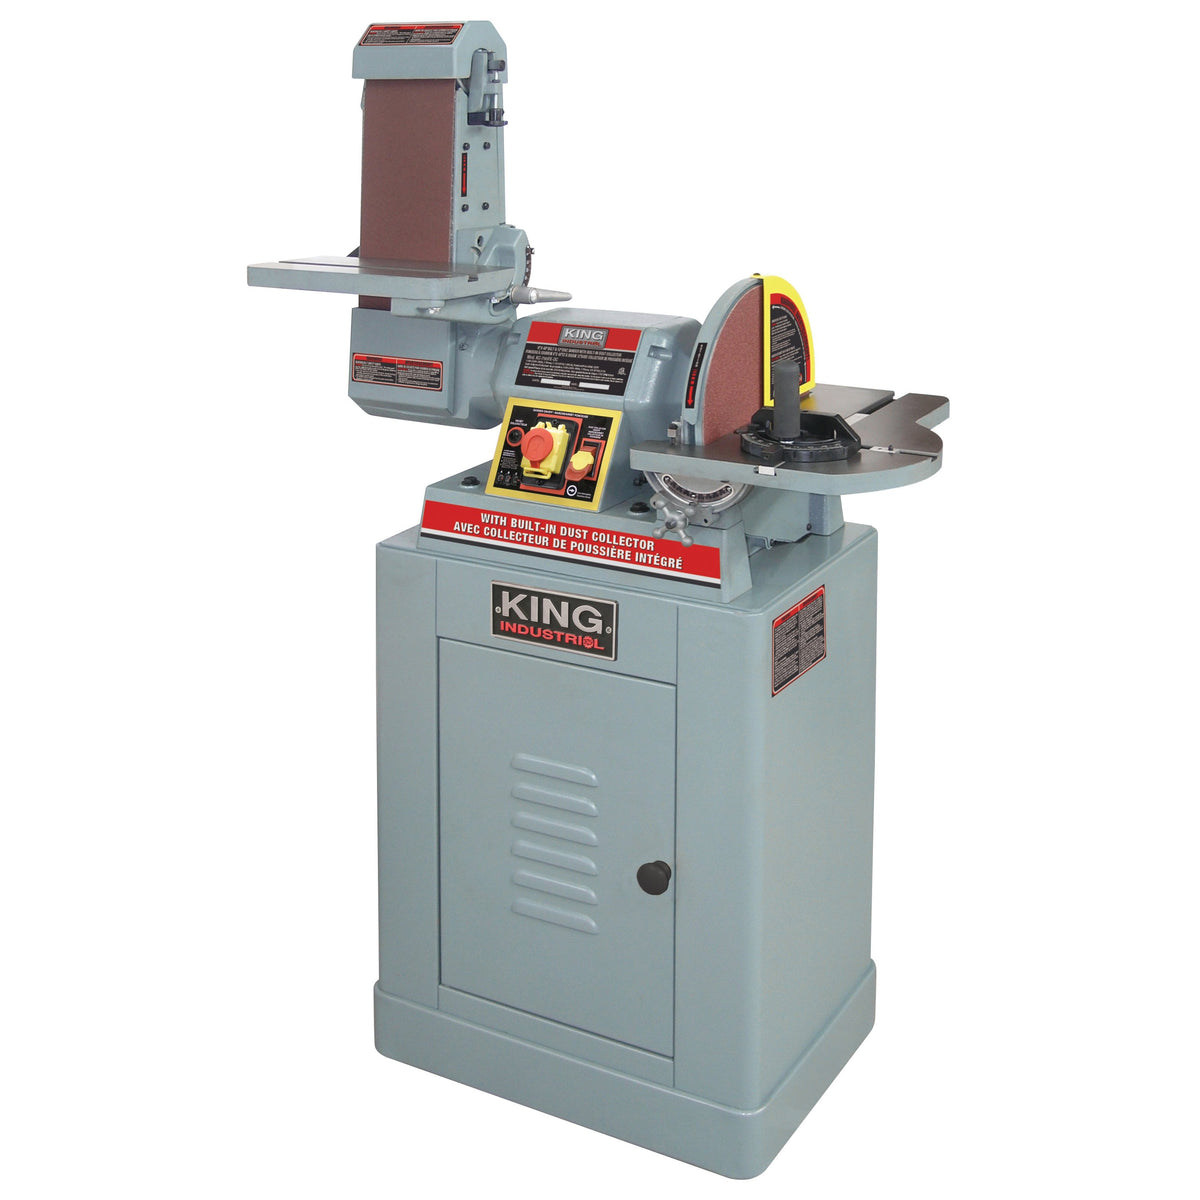 Ensemble d'accessoires pneumatiques 20 mcx. KING Canada - Power Tools,  Woodworking and Metalworking Machines by King Canada